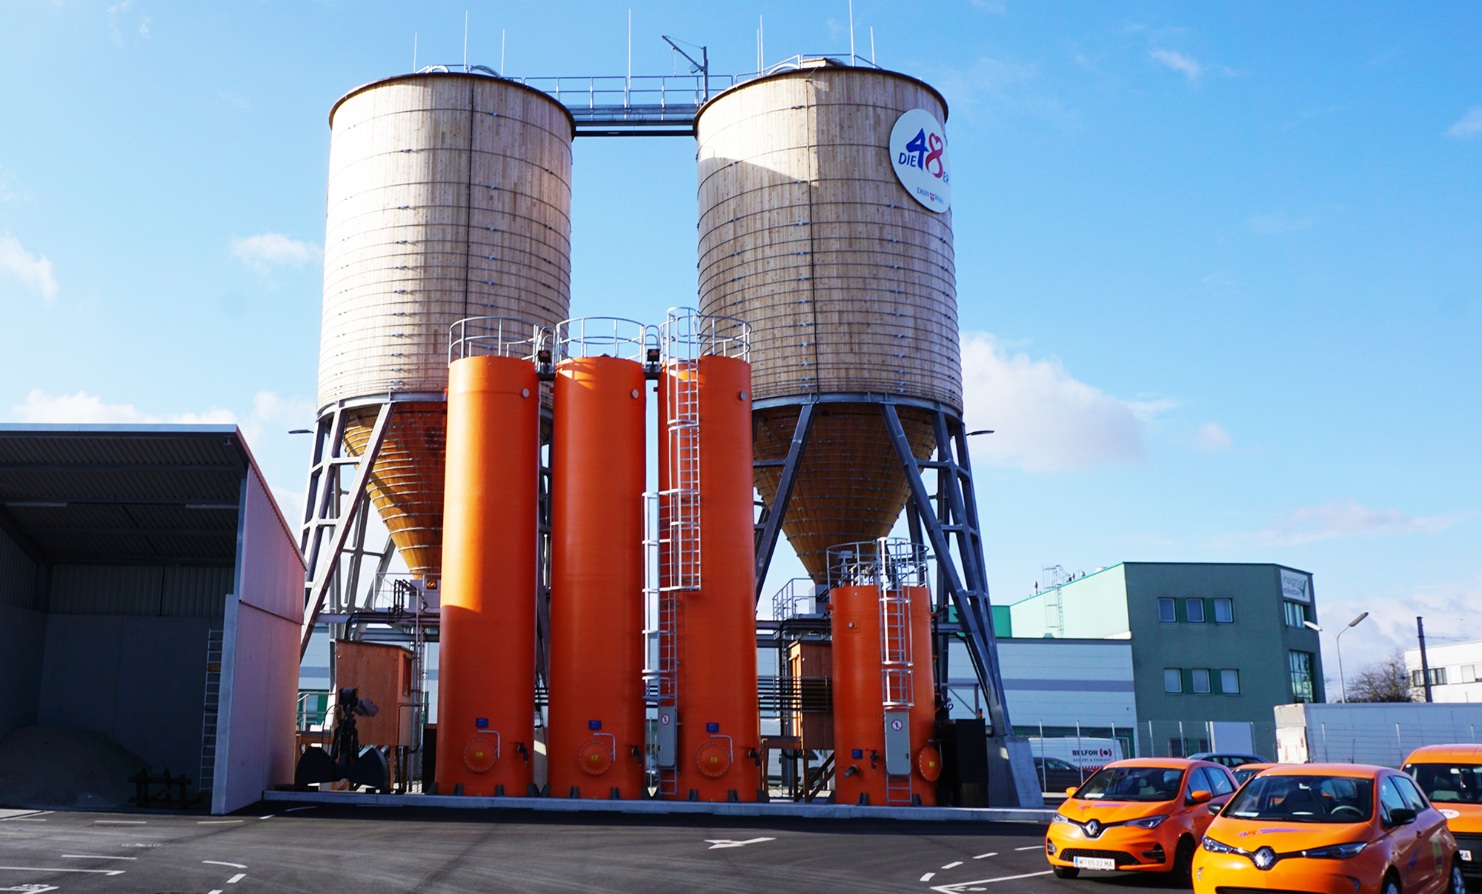 Winter service facility with wooden silos and brine technology in Blumenthal Vienna